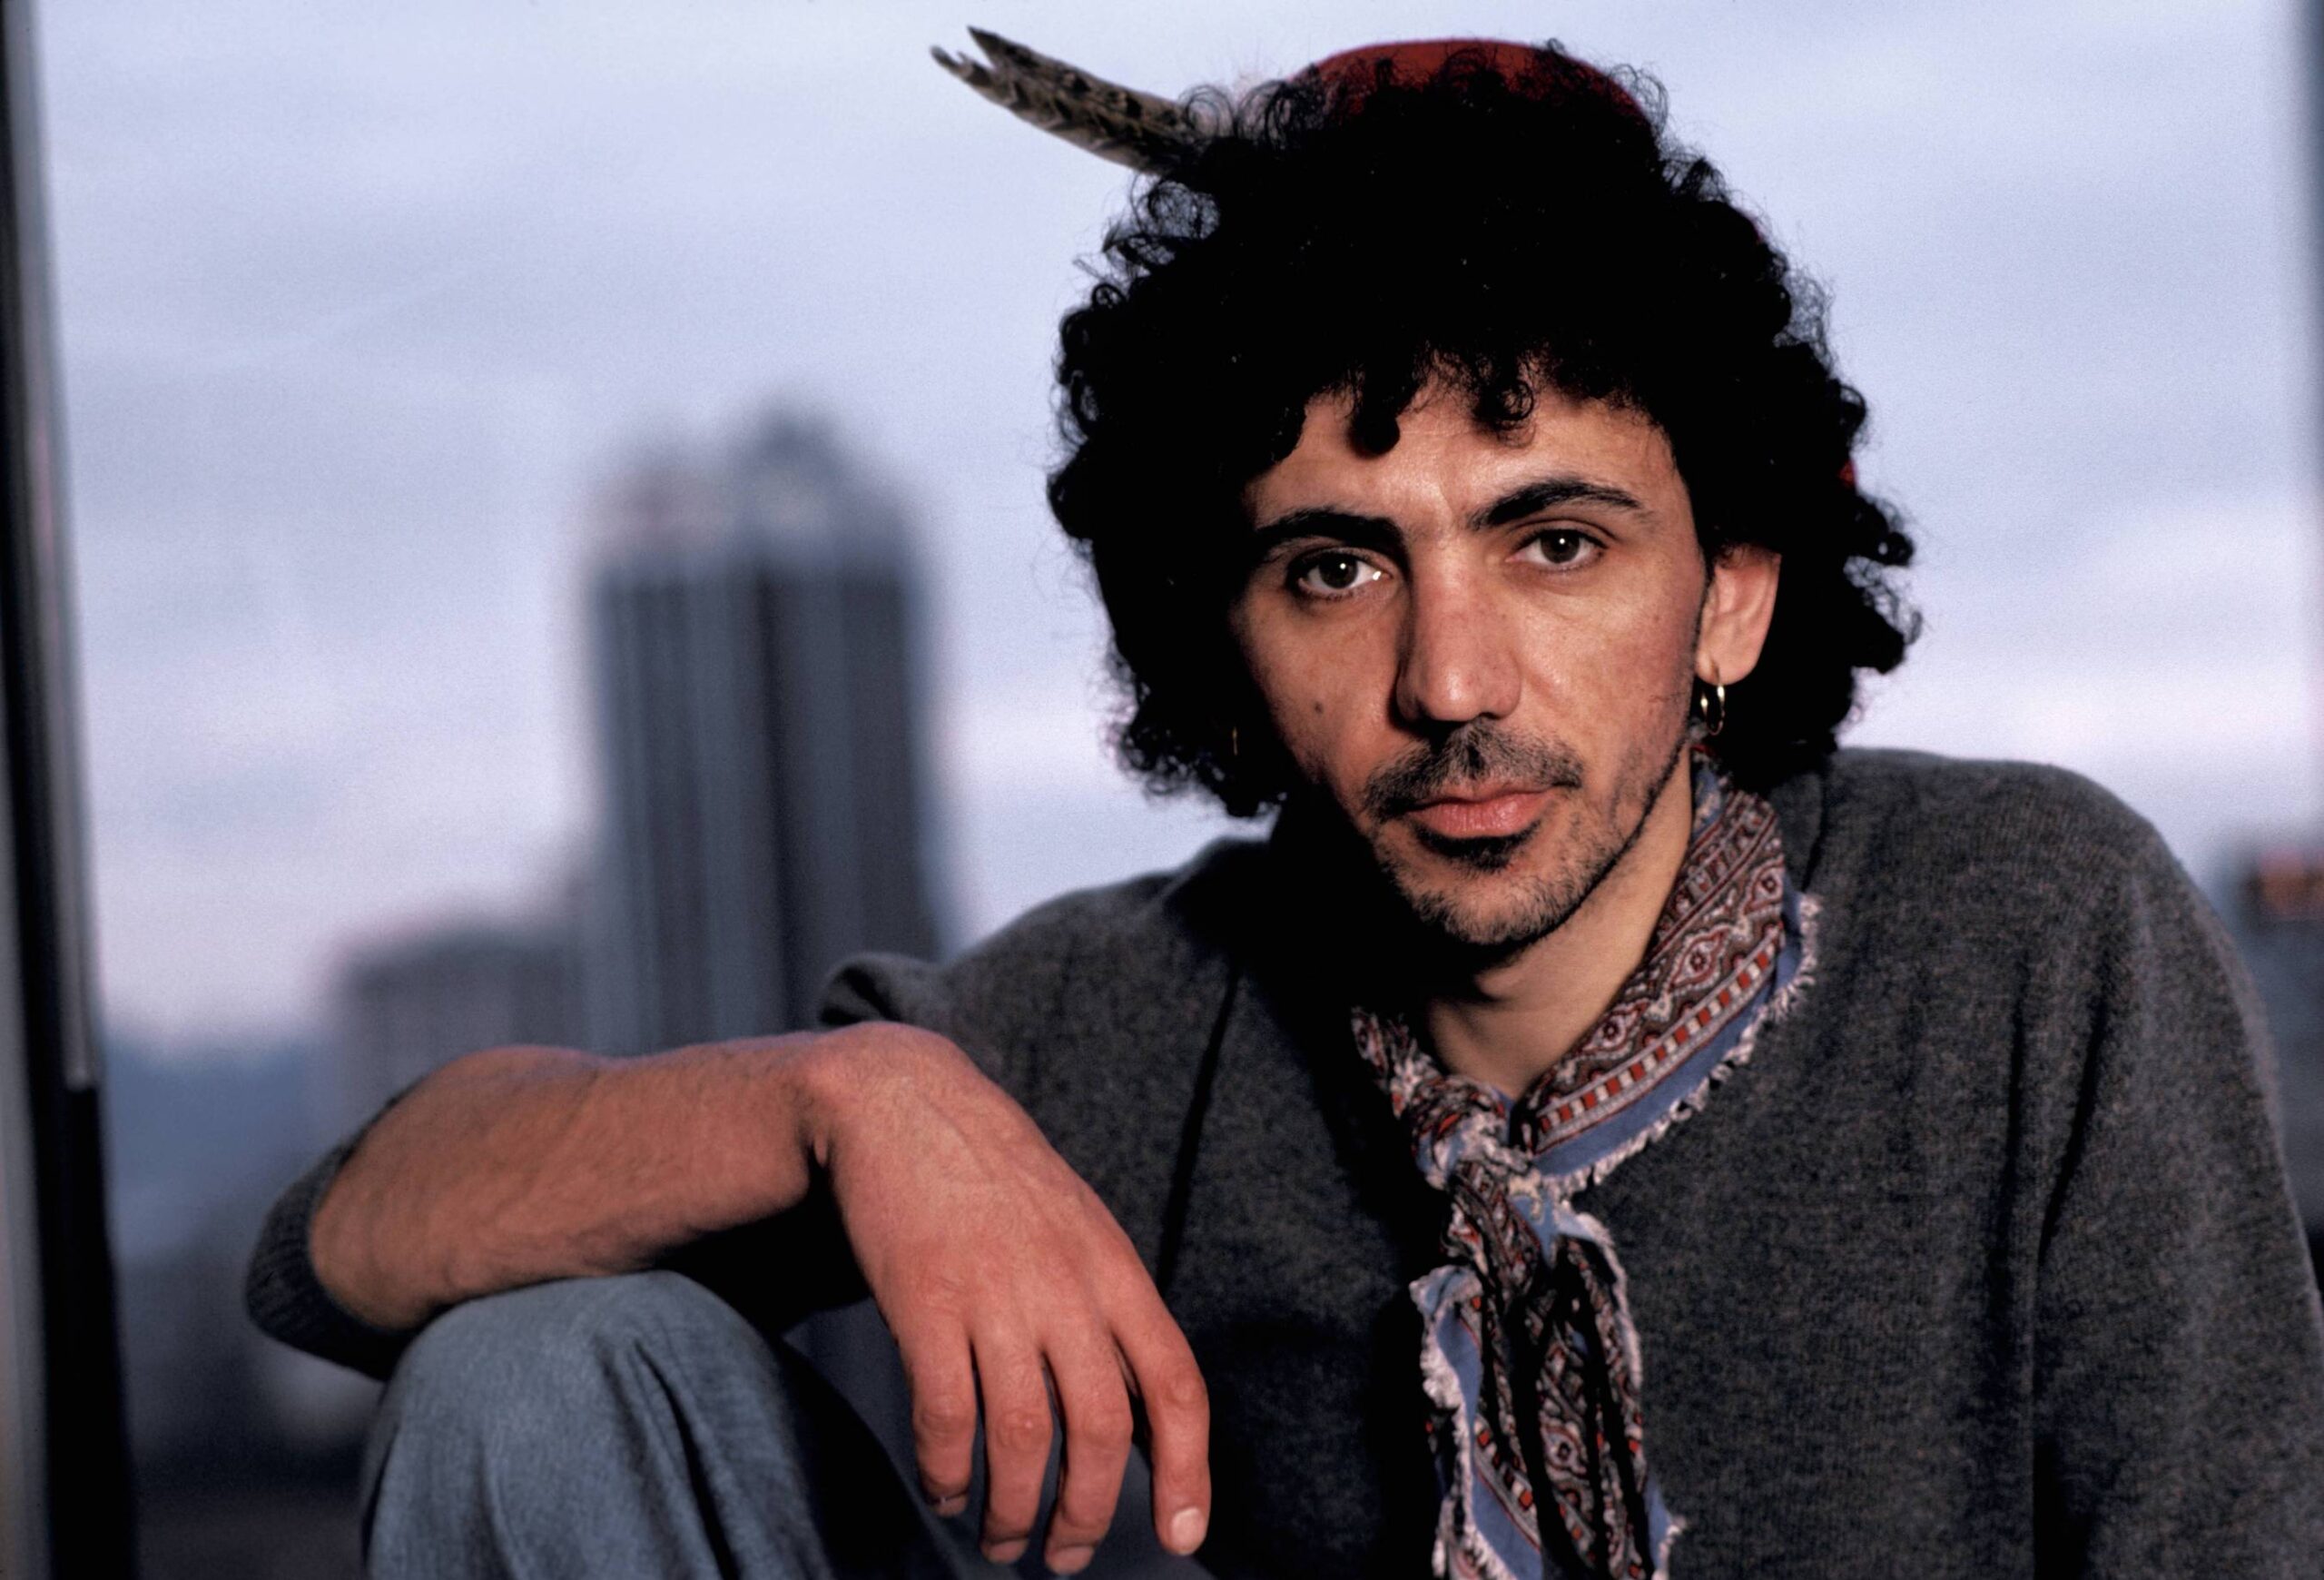 Dexys’ Kevin Rowland on “Come on Eileen”: ‘The Irish Are Really Fucked Up’